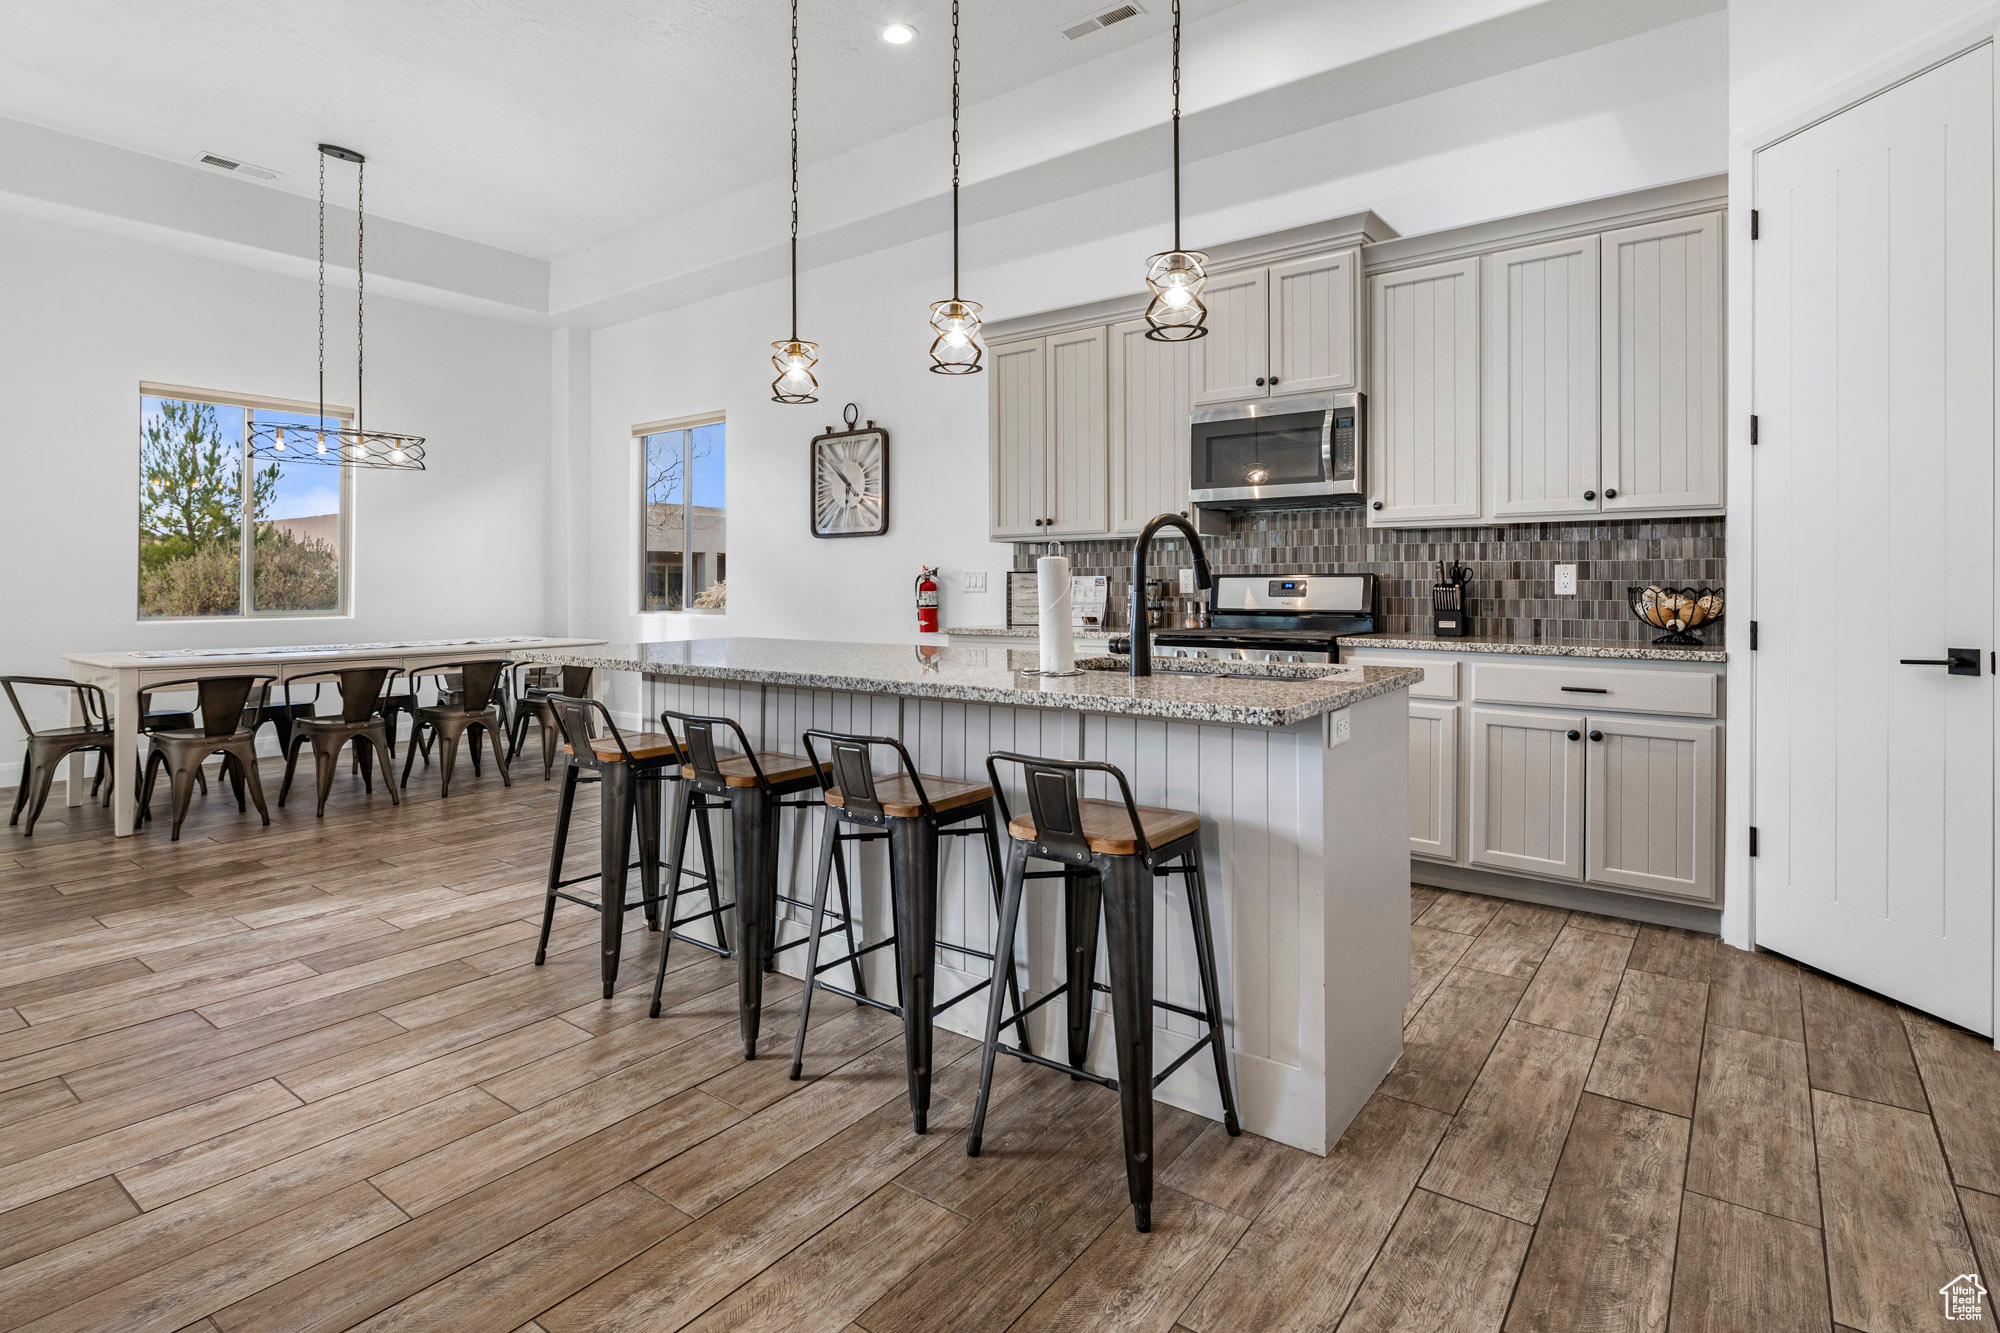 Kitchen featuring pendant lighting, a breakfast bar, light stone counters, light hardwood / wood-style flooring, and stainless steel appliances